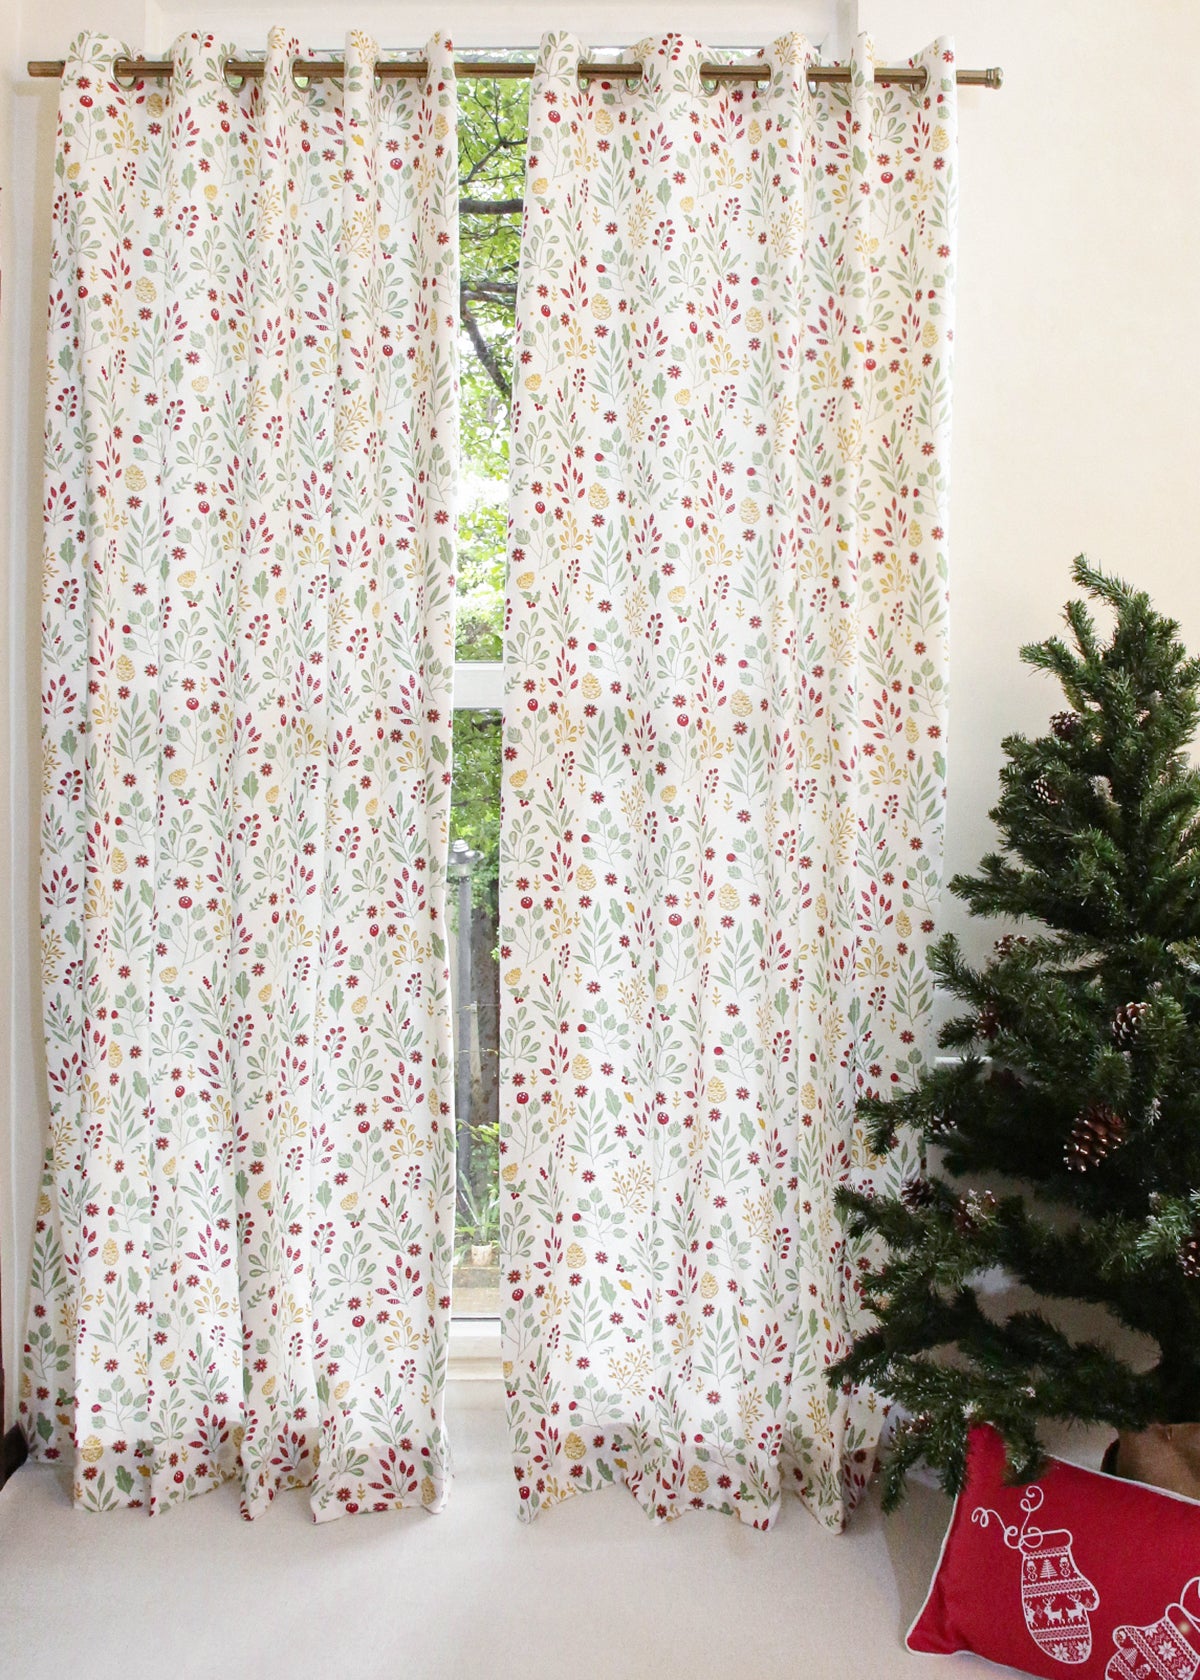 Foraged Berries 100% Customizable Cotton floral curtain for living room - Room darkening - Multicolor